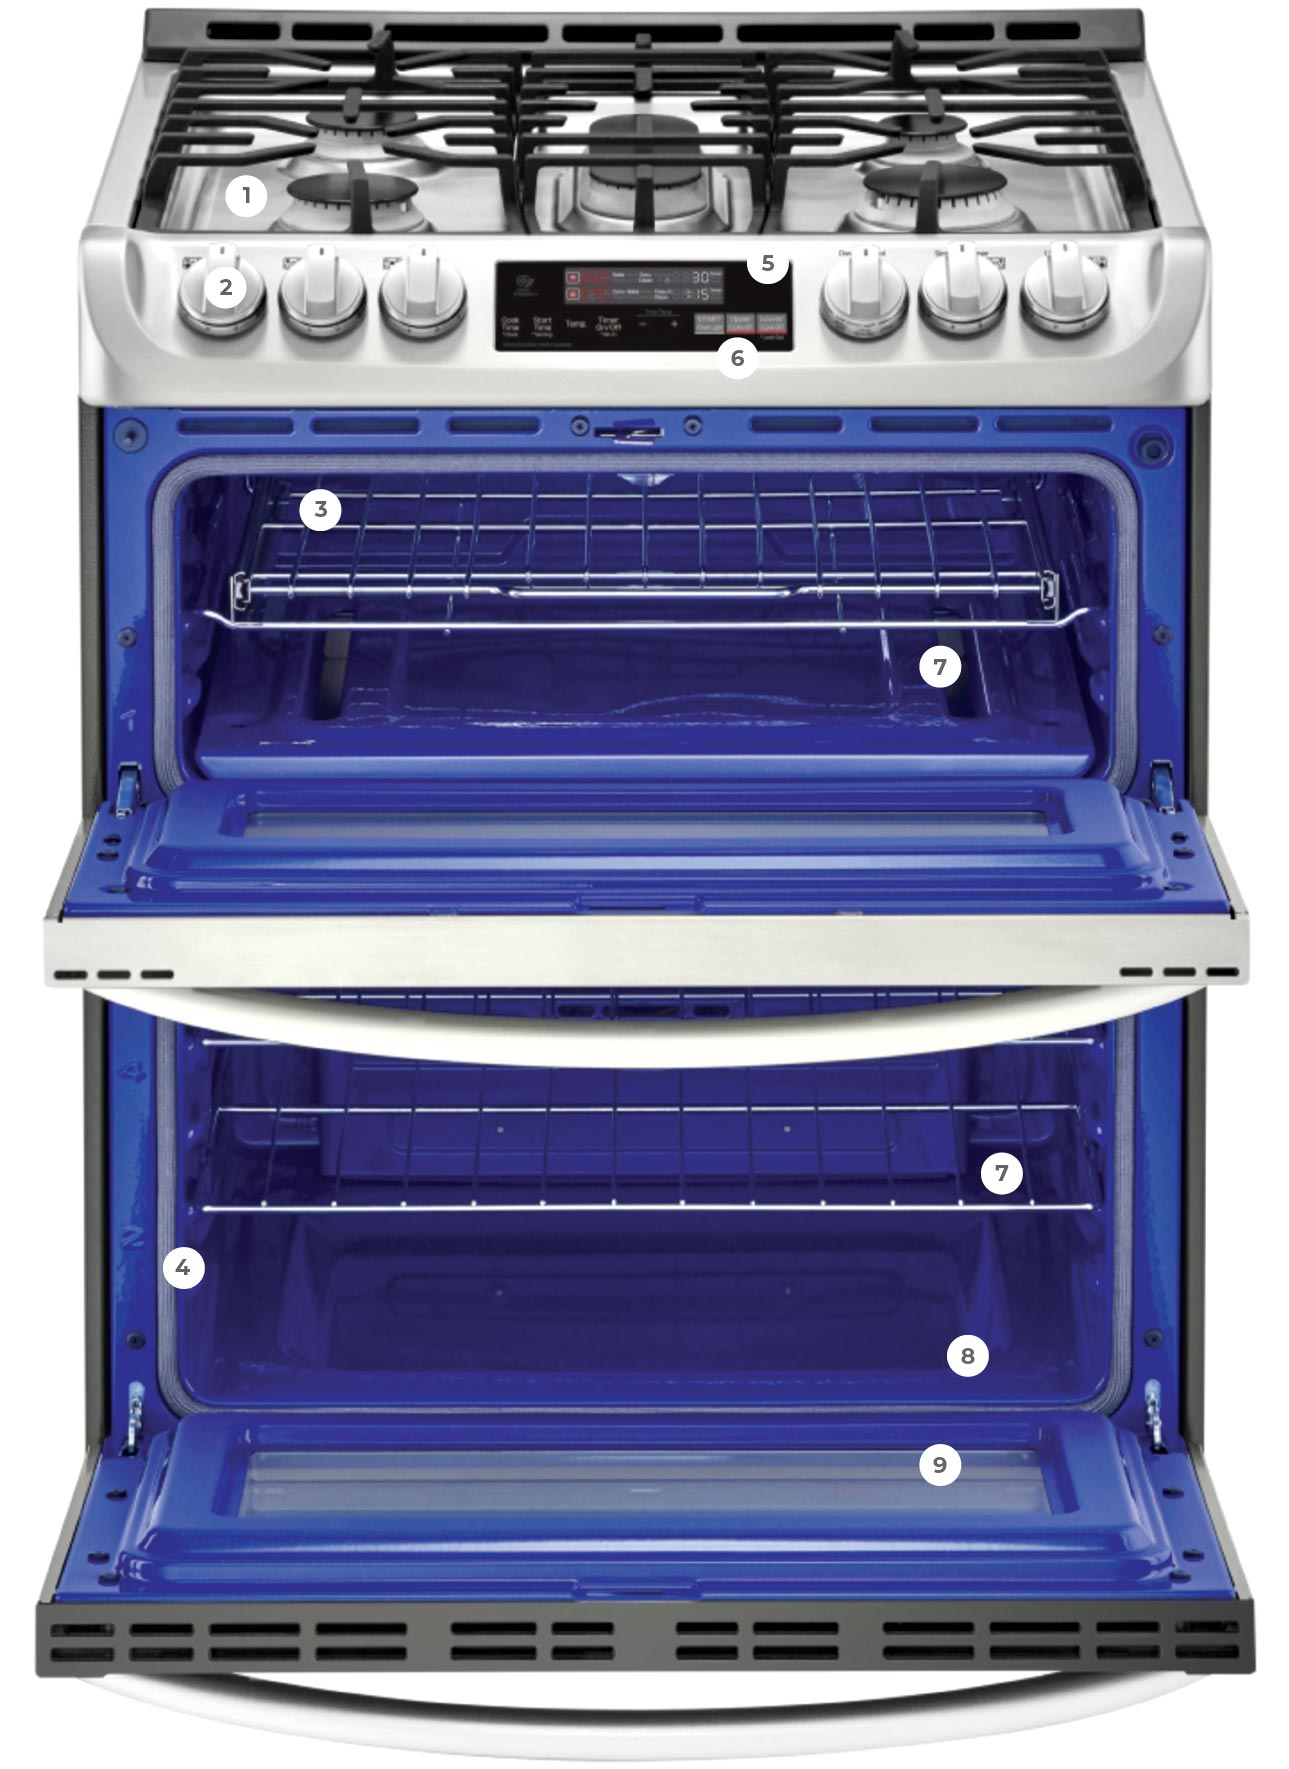 Blue LG oven and range with numbers showing specific details